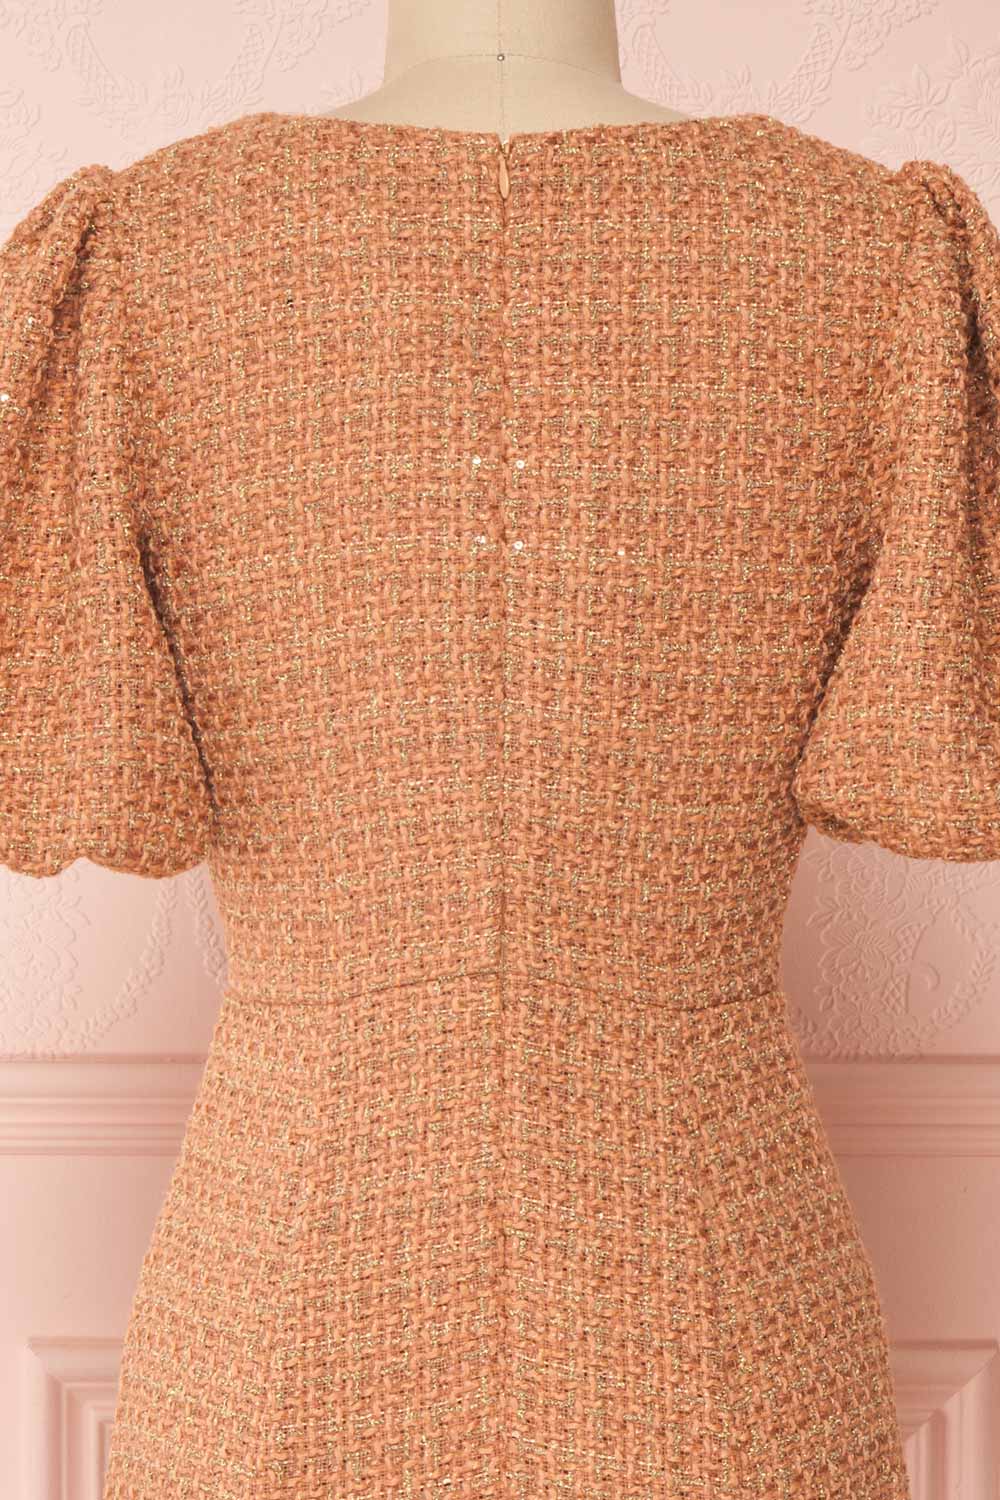 Stephim Salmon & Gold Tweed A-Line Midi Dress | Boutique 1861 back close-up